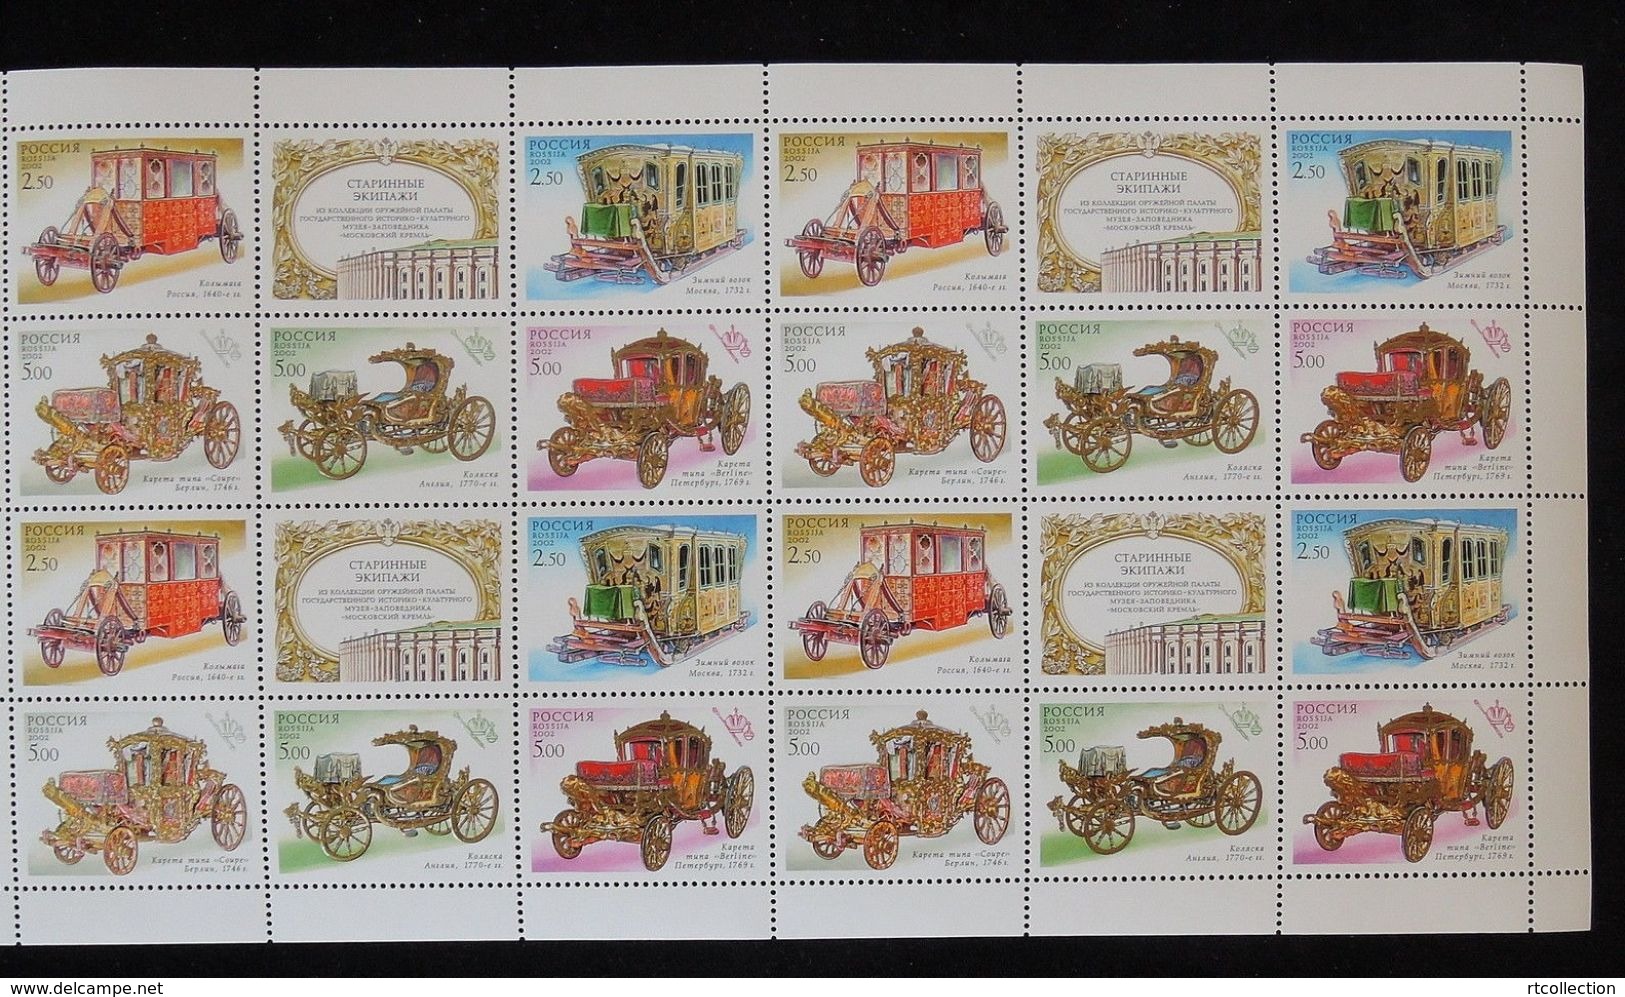 Russia 2002 Sheet Antique Coach Carriage Stage-Coaches Moscow Berlin St. Petersburg Car Transport Stamps MNH Mi 994-998 - Full Sheets